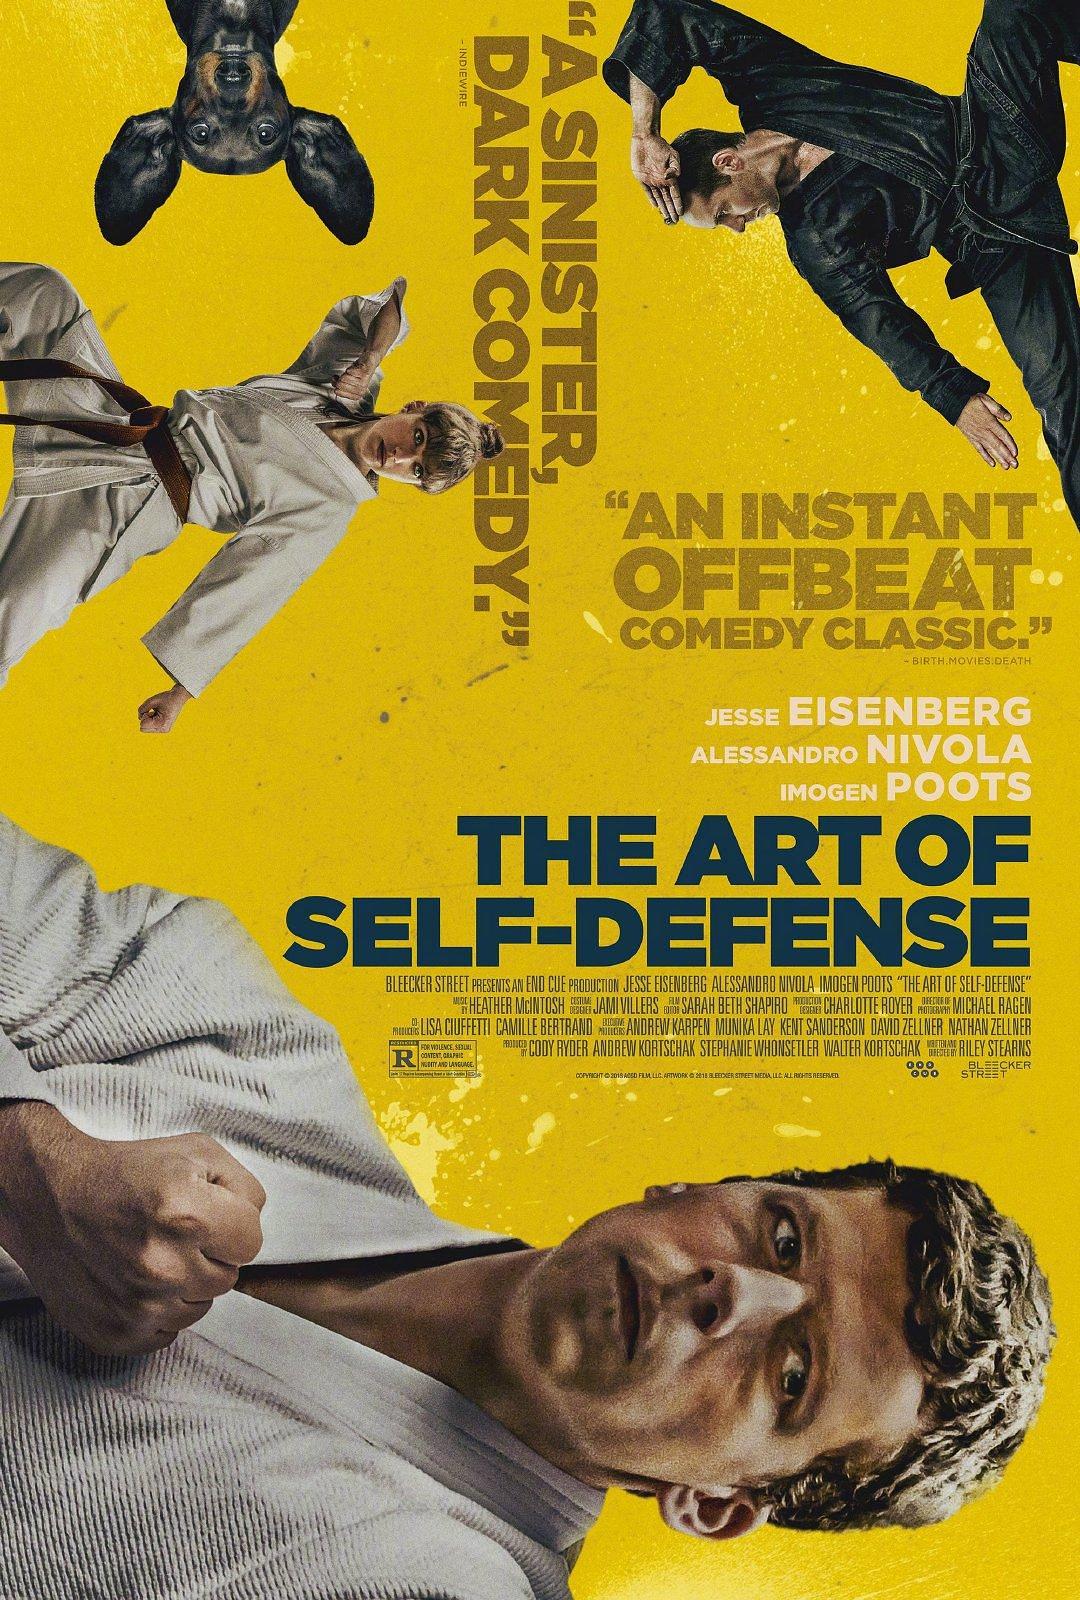  The.Art.of.Self.Defense.2019.720p.BluRay.x264-DRONES 5.47GB-1.png